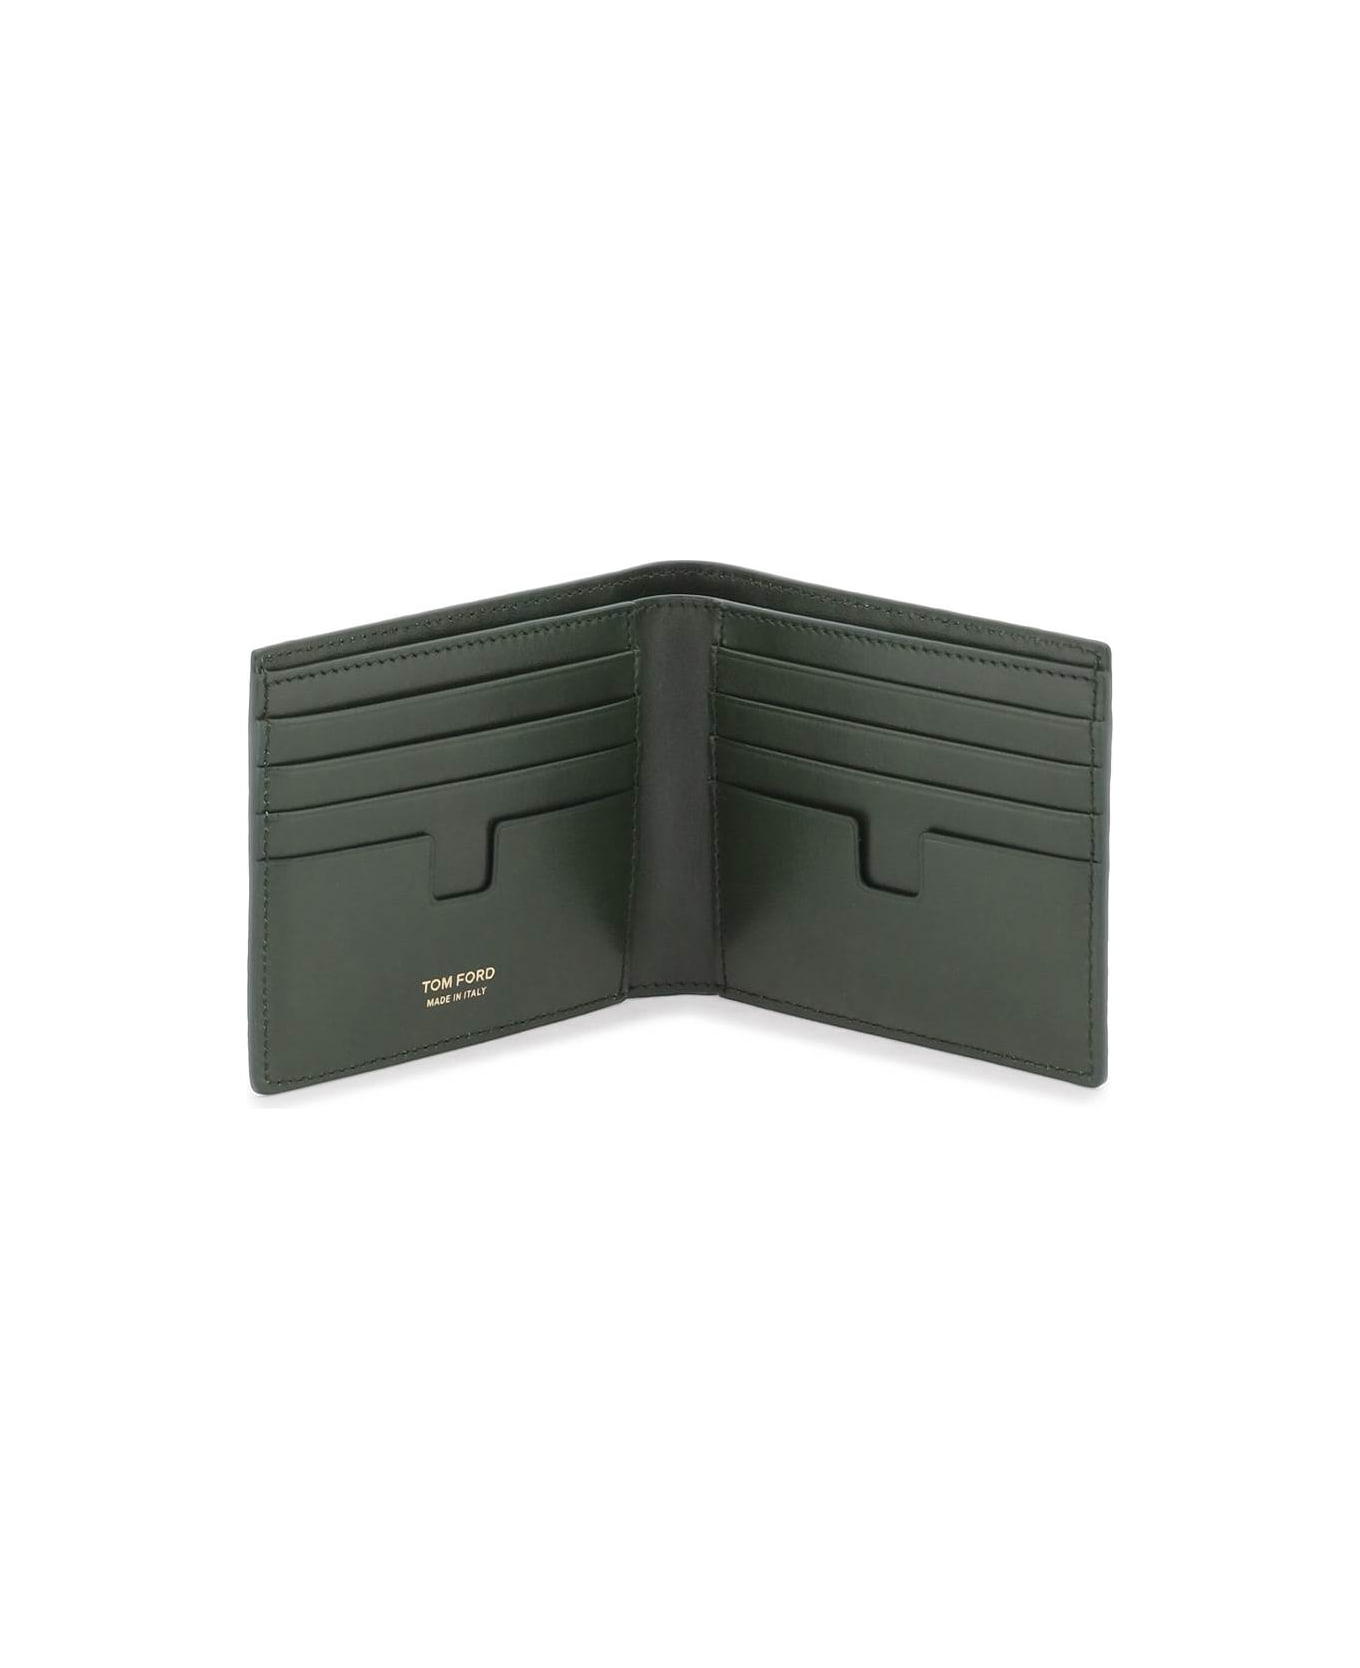 Tom Ford Croc T Line Wallet - RIFLE GREEN (Green) 財布